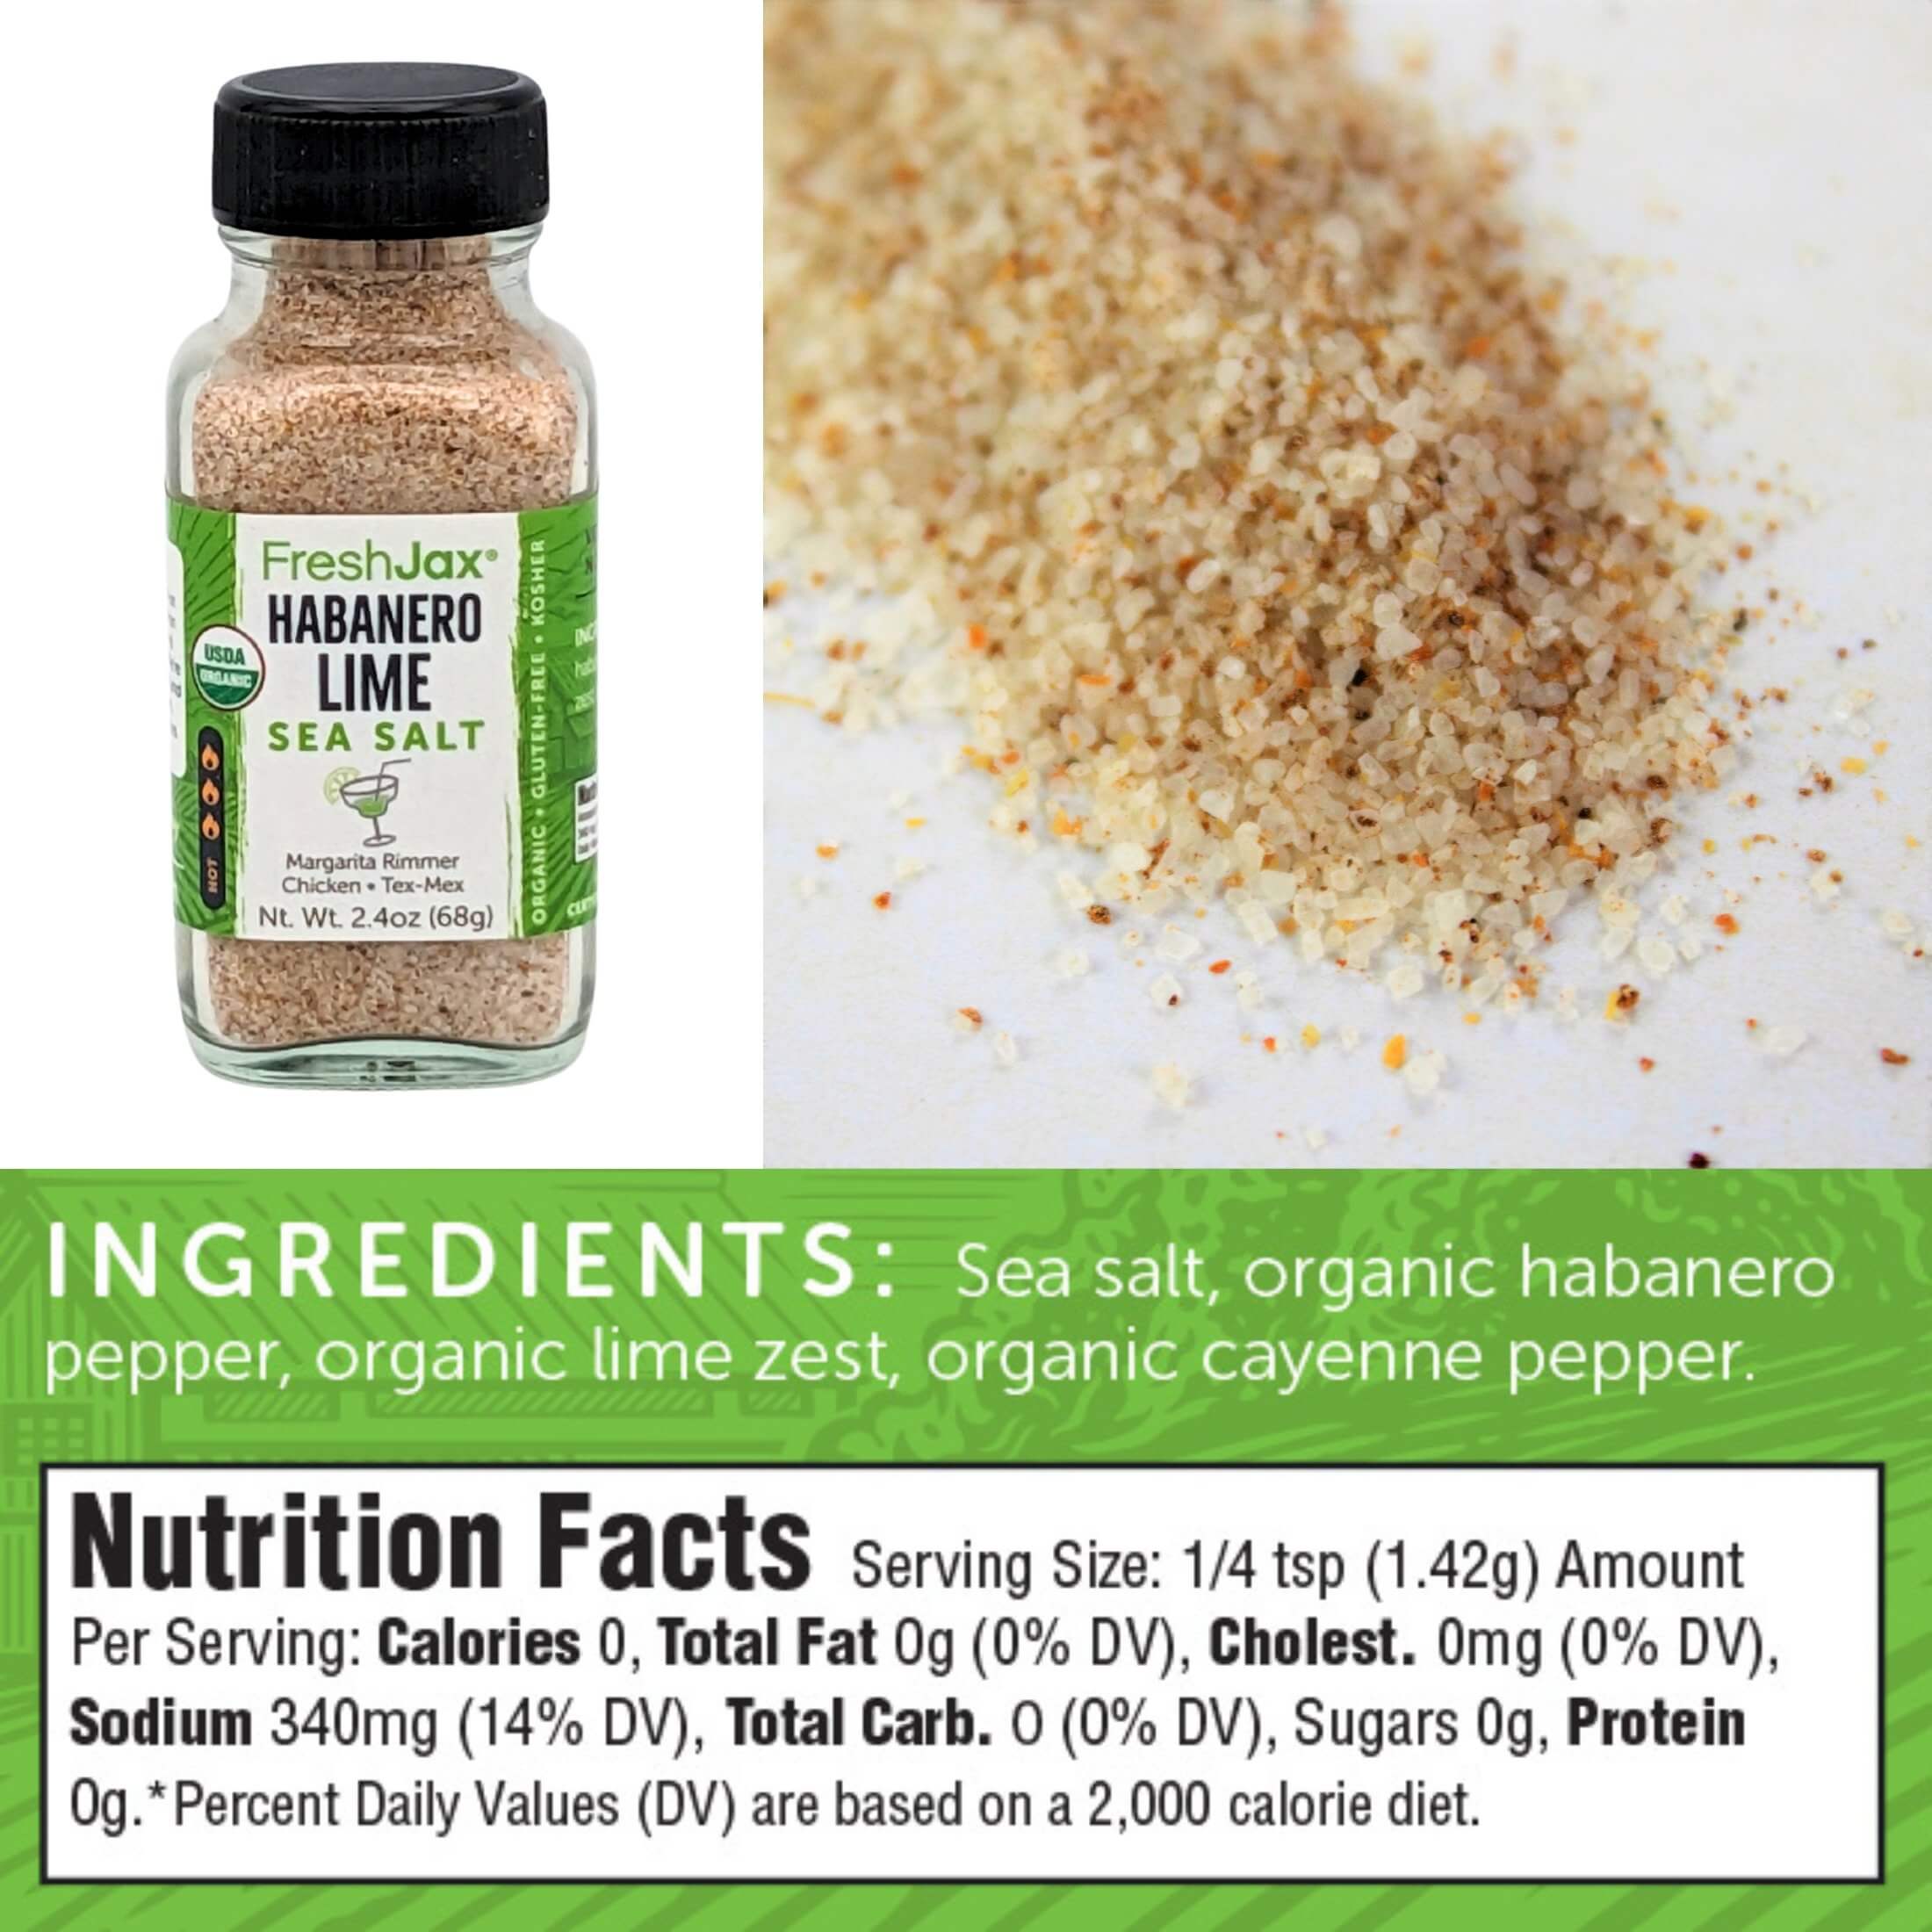 FreshJax Organic Spices Habanero Lime Sea Salt Ingredients and Nutritional Information